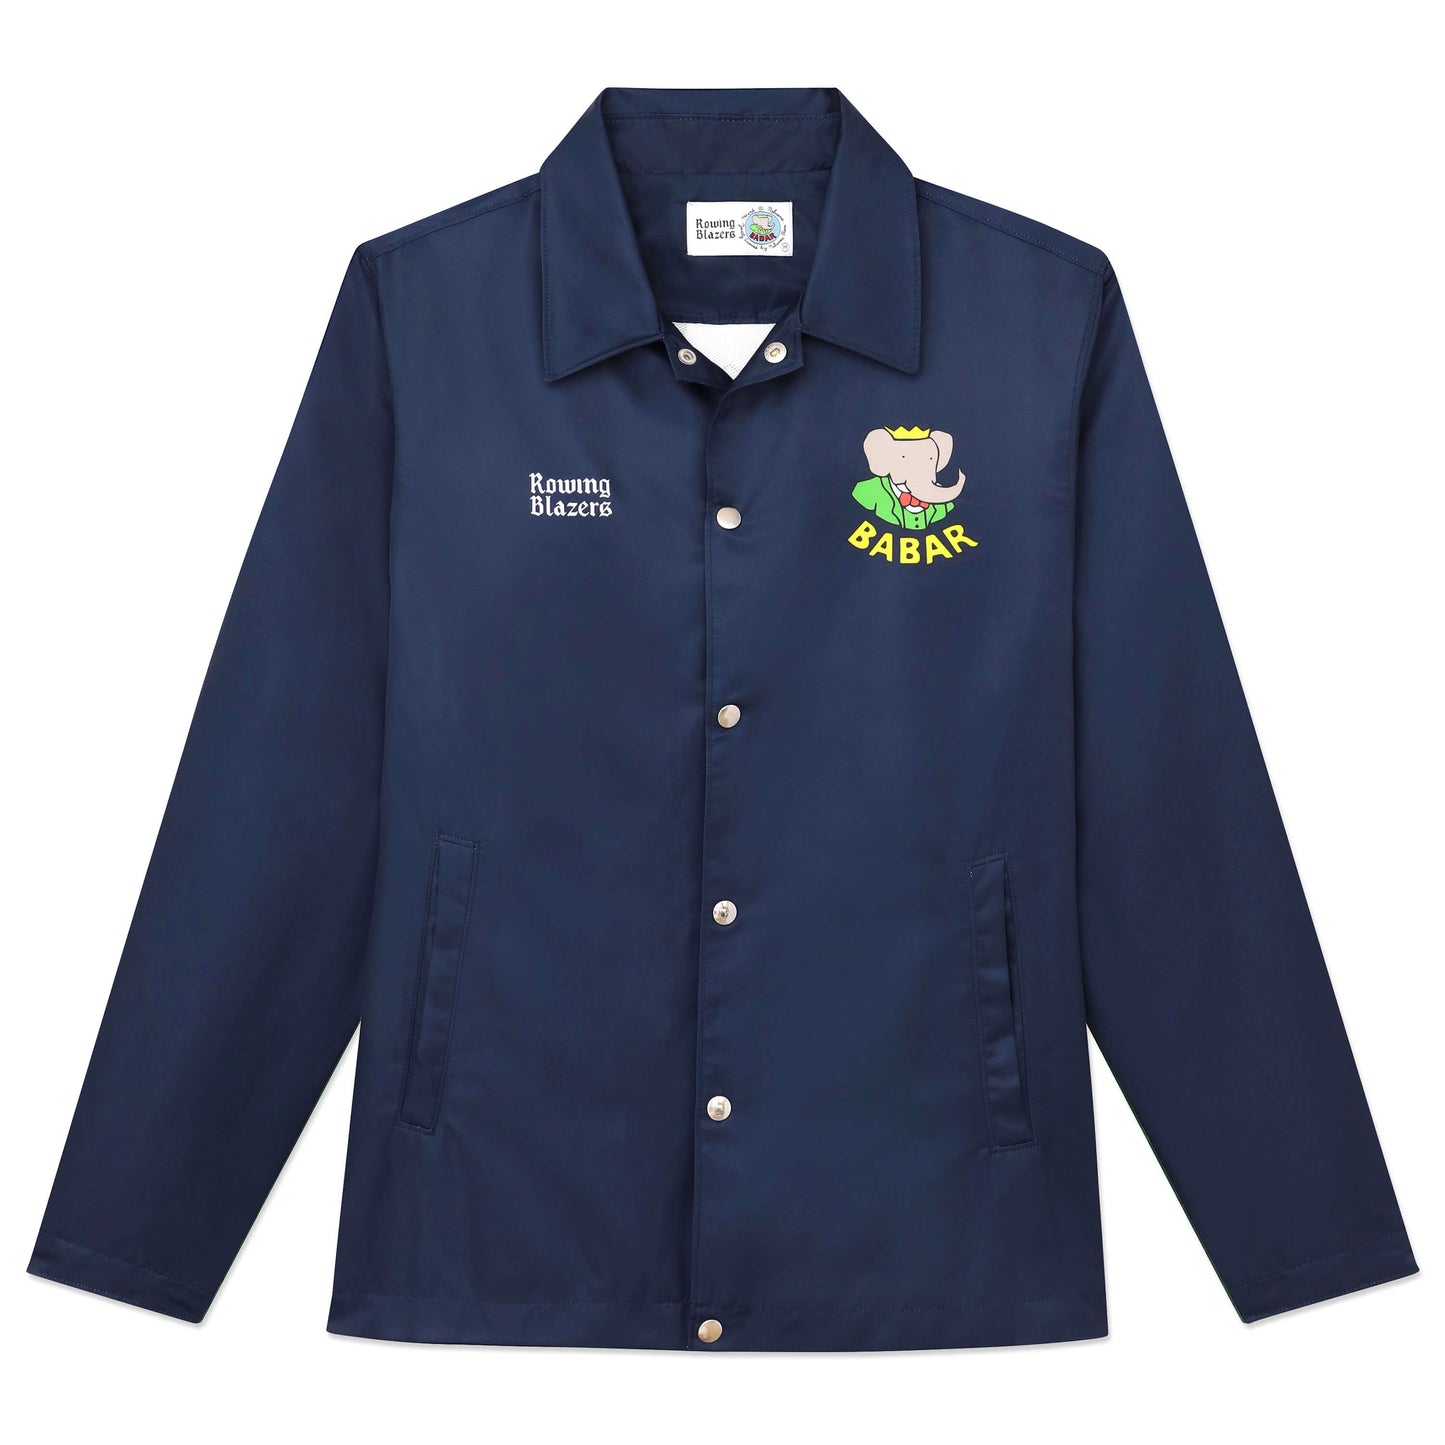 Front of navy coach's jacket with printed Babar motif.